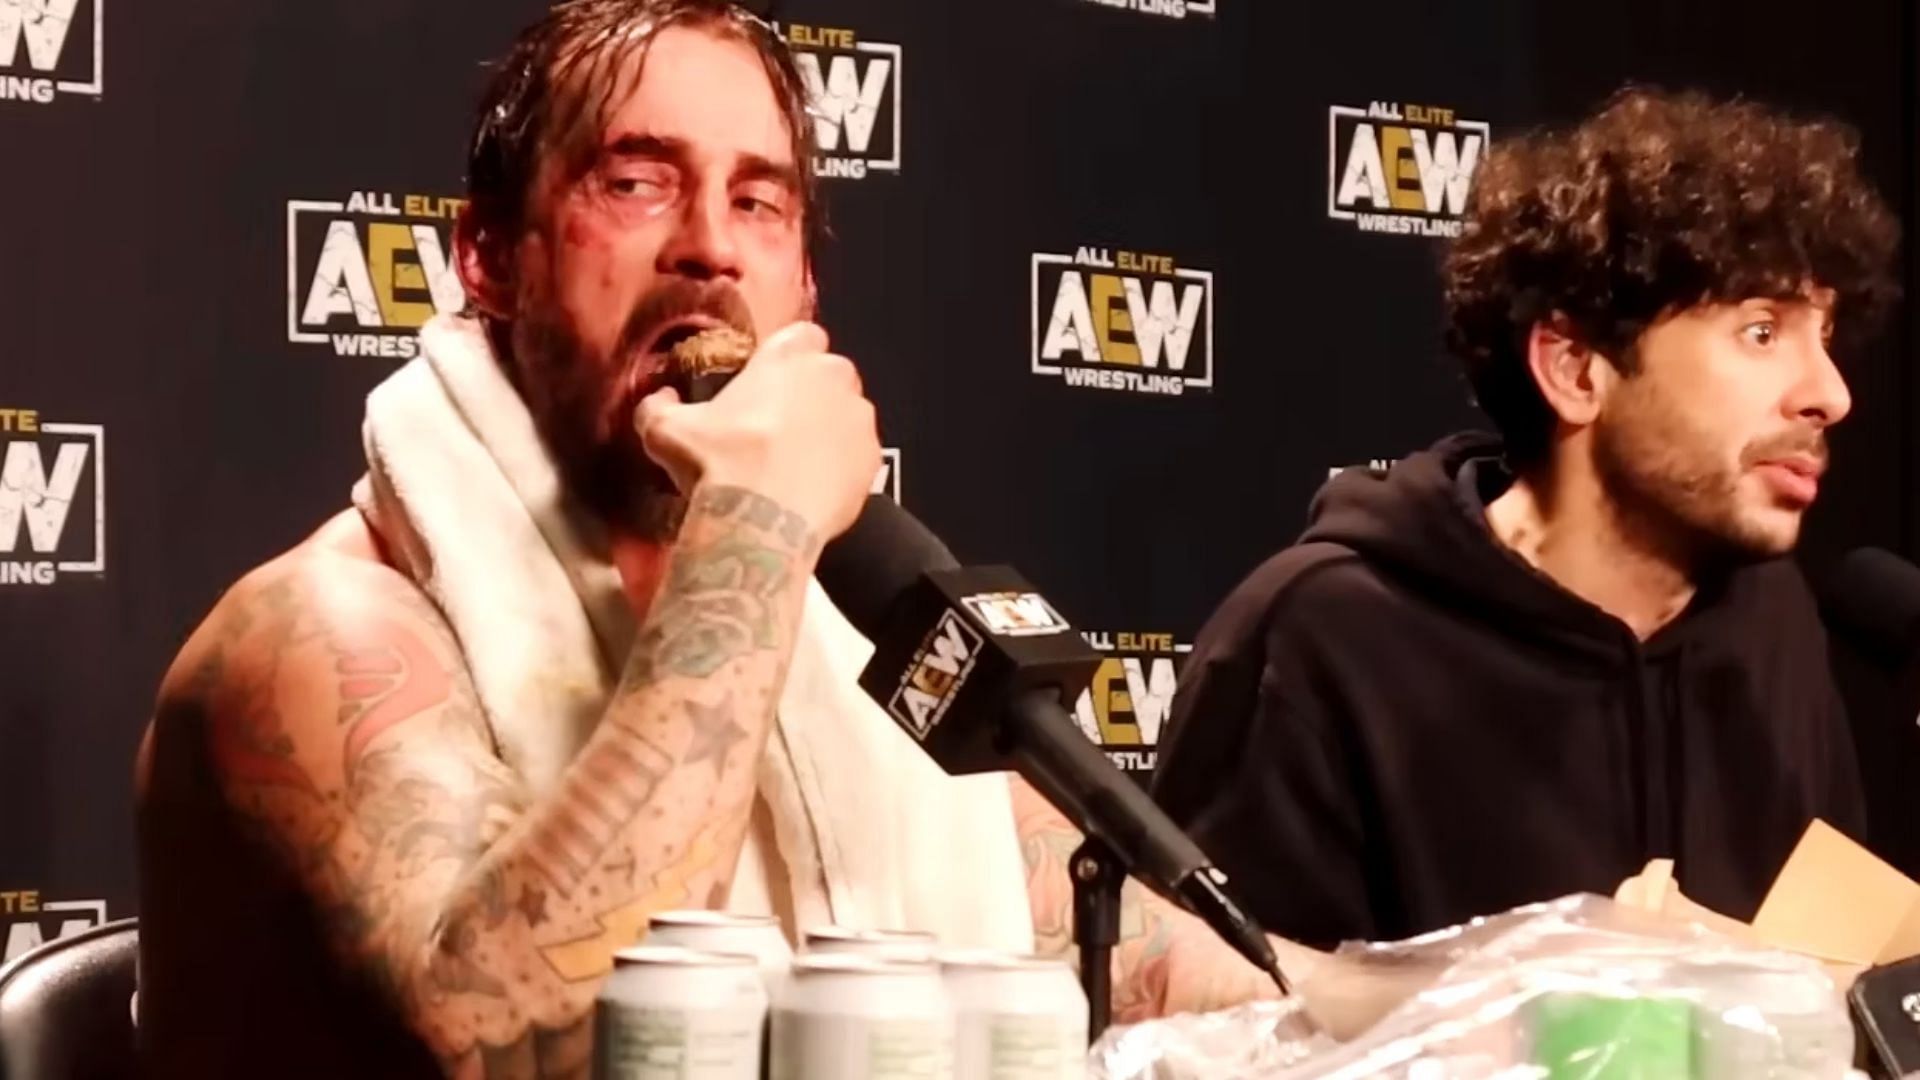 Dutch Mantell believes CM Punk and the Elite should face severe consequences for backstage brawl in AEW